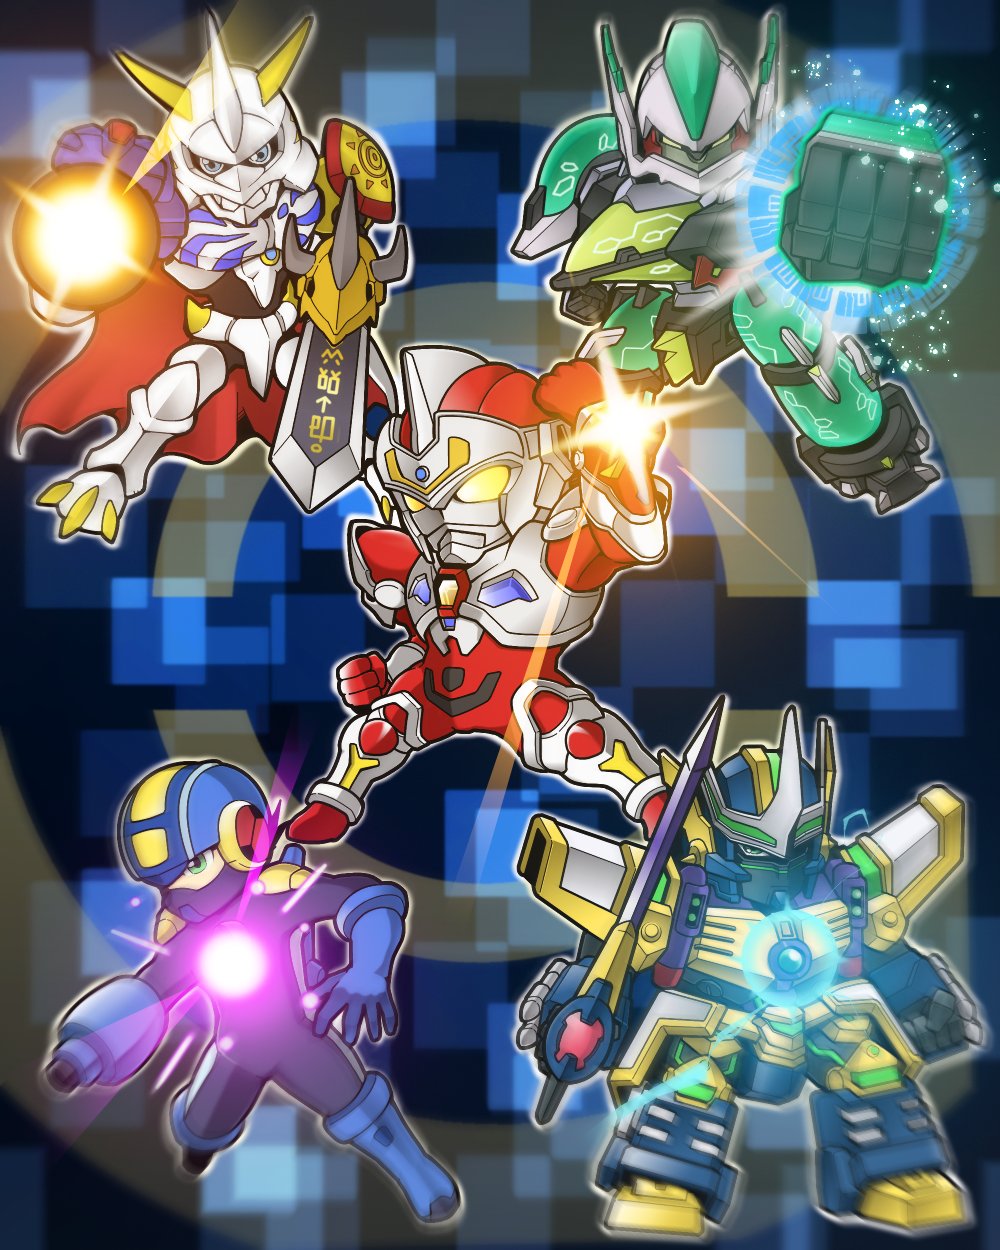 1boy arm_blade arm_cannon chibi clenched_hands crossover denkou_choujin_gridman dennou_boukenki_webdiver digimon digimon_(creature) gamiani_zero gladion_(webdiver) glowing green_eyes gridman_(character) highres holding holding_sword holding_weapon mask mecha mega_man_(series) mega_man_battle_network megaman.exe mouth_mask multiple_crossover omegamon open_hand srw_cover super_robot super_robot_wars sword tokusatsu trait_connection weapon yellow_eyes zegapain zegapain_altair